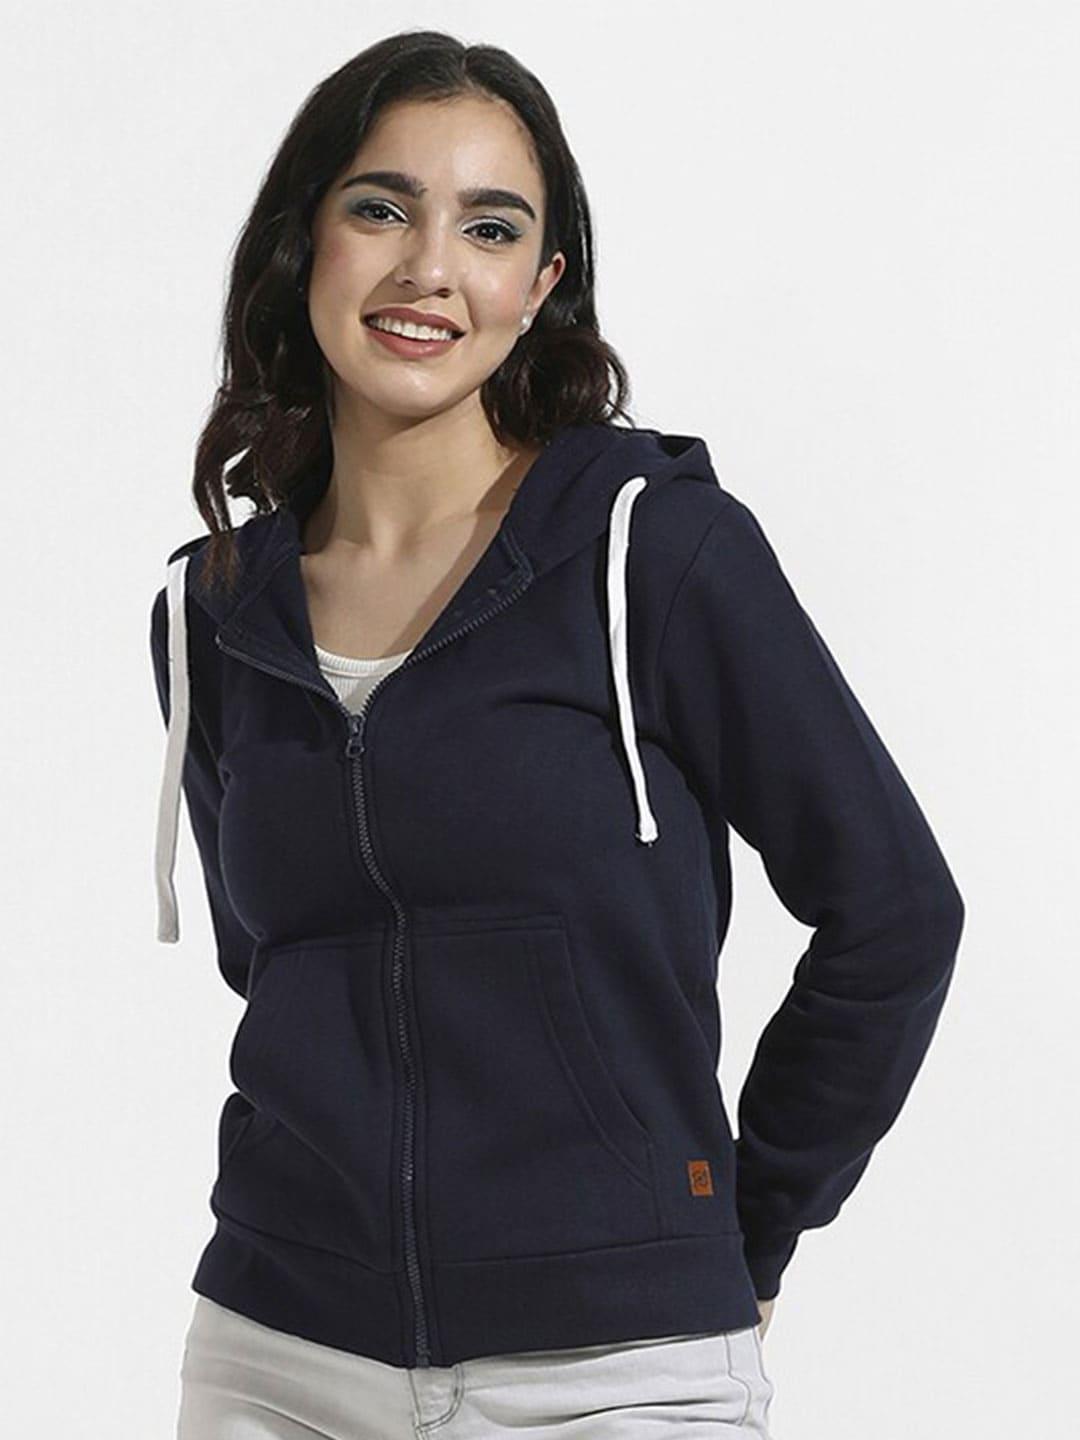 Campus Sutra  Hooded Cotton Front Open Sweatshirt